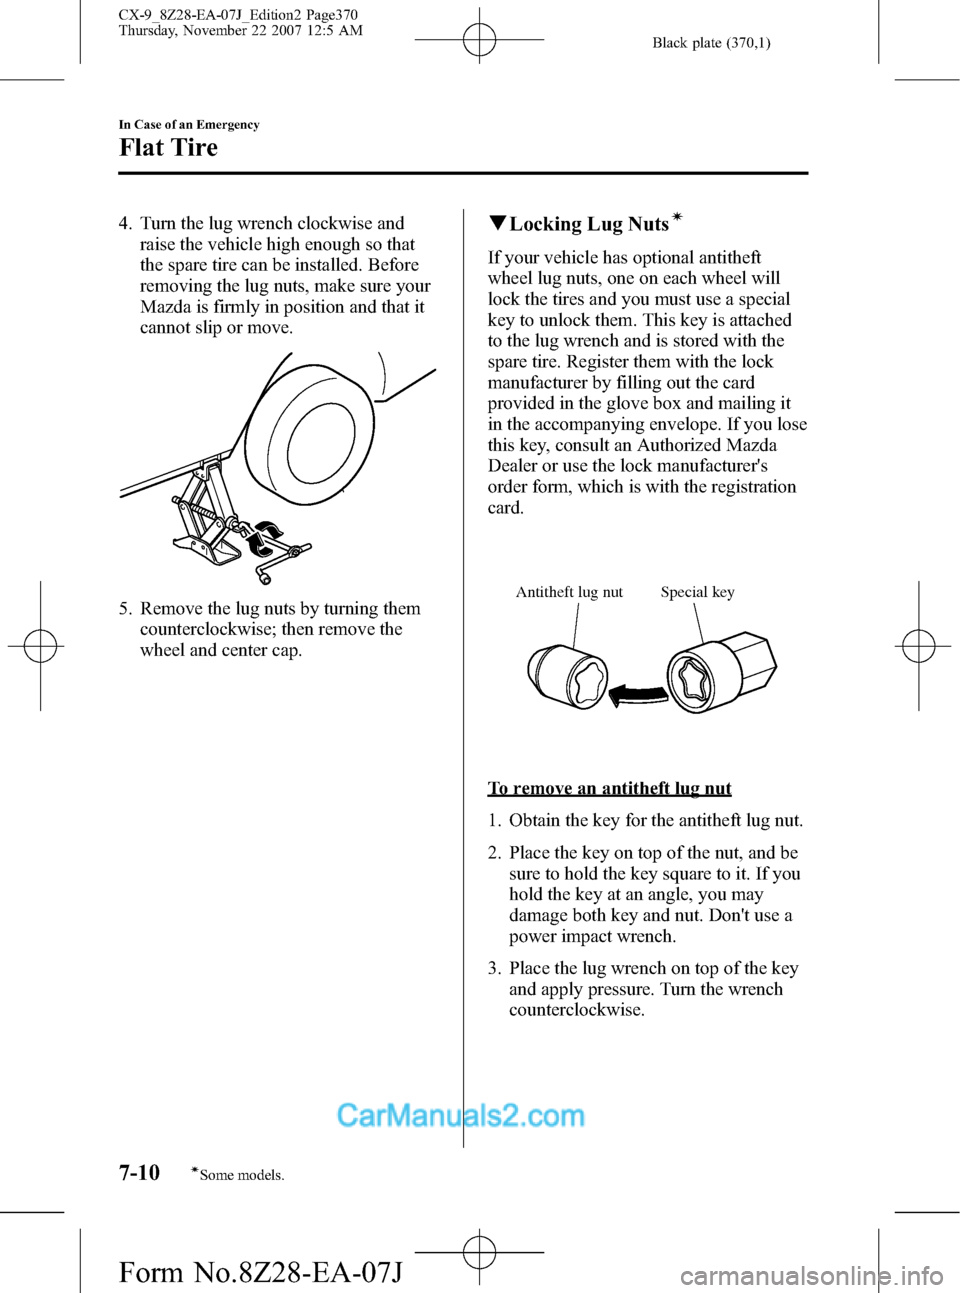 MAZDA MODEL CX-9 2008  Owners Manual (in English) Black plate (370,1)
4. Turn the lug wrench clockwise and
raise the vehicle high enough so that
the spare tire can be installed. Before
removing the lug nuts, make sure your
Mazda is firmly in position